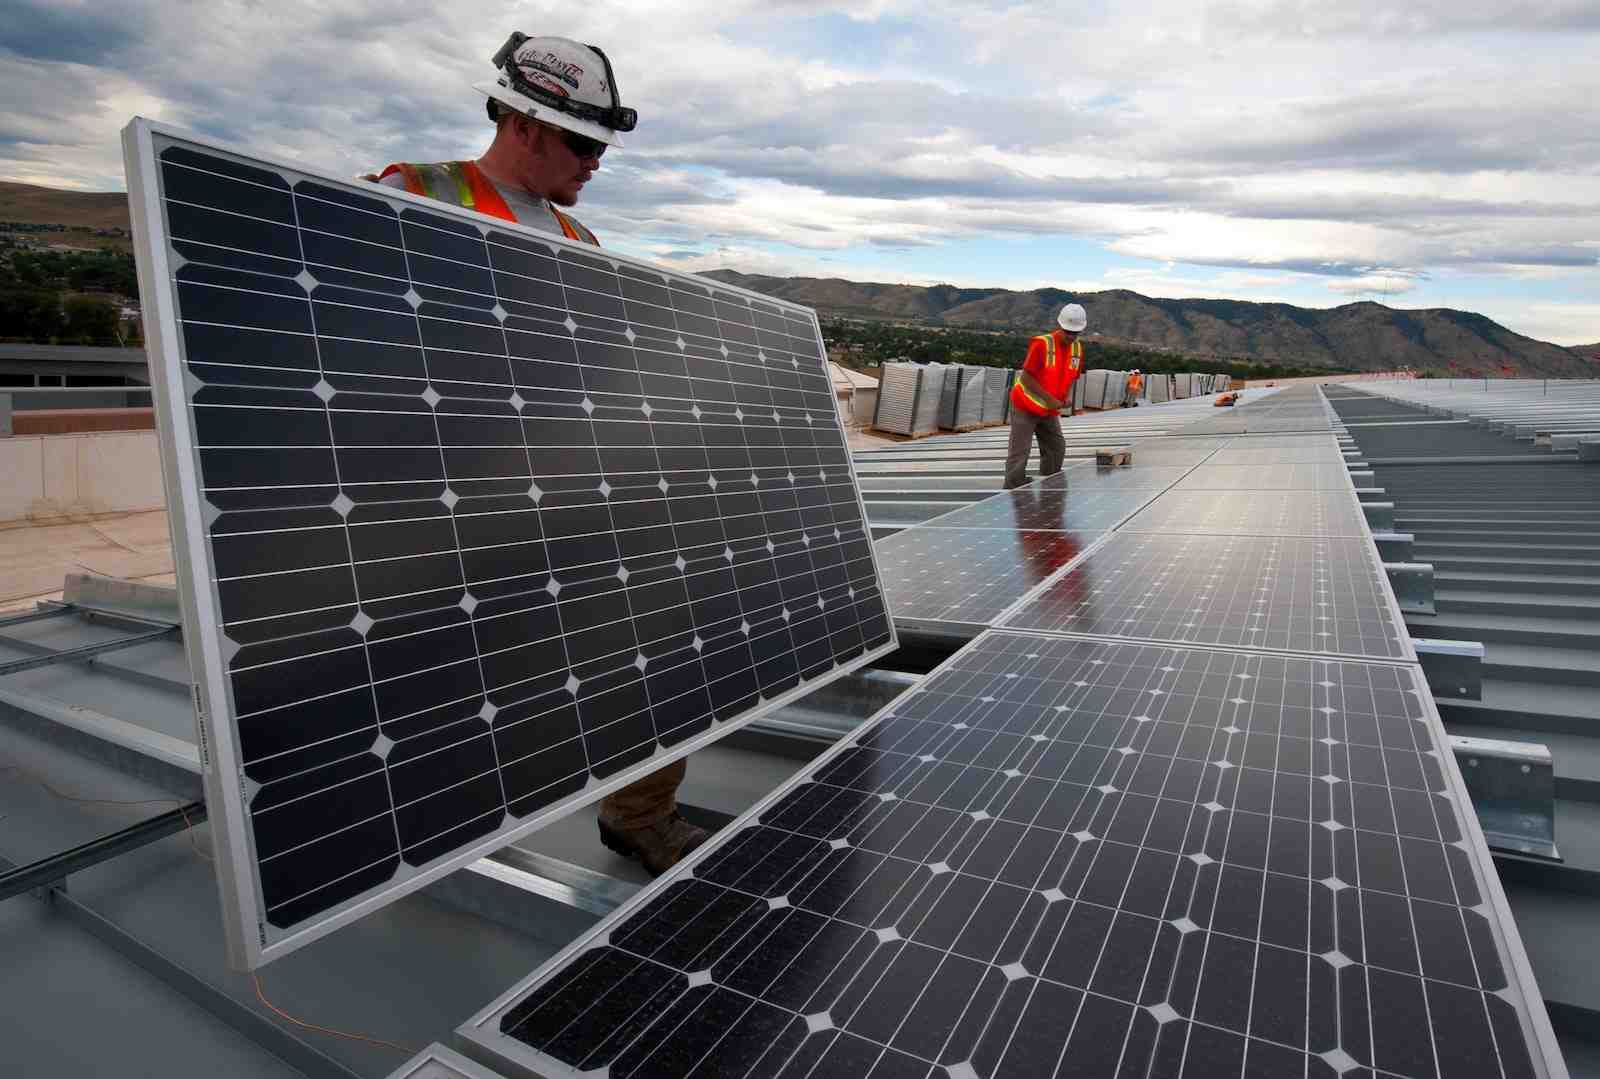 What happens to the current when you add another solar panel?